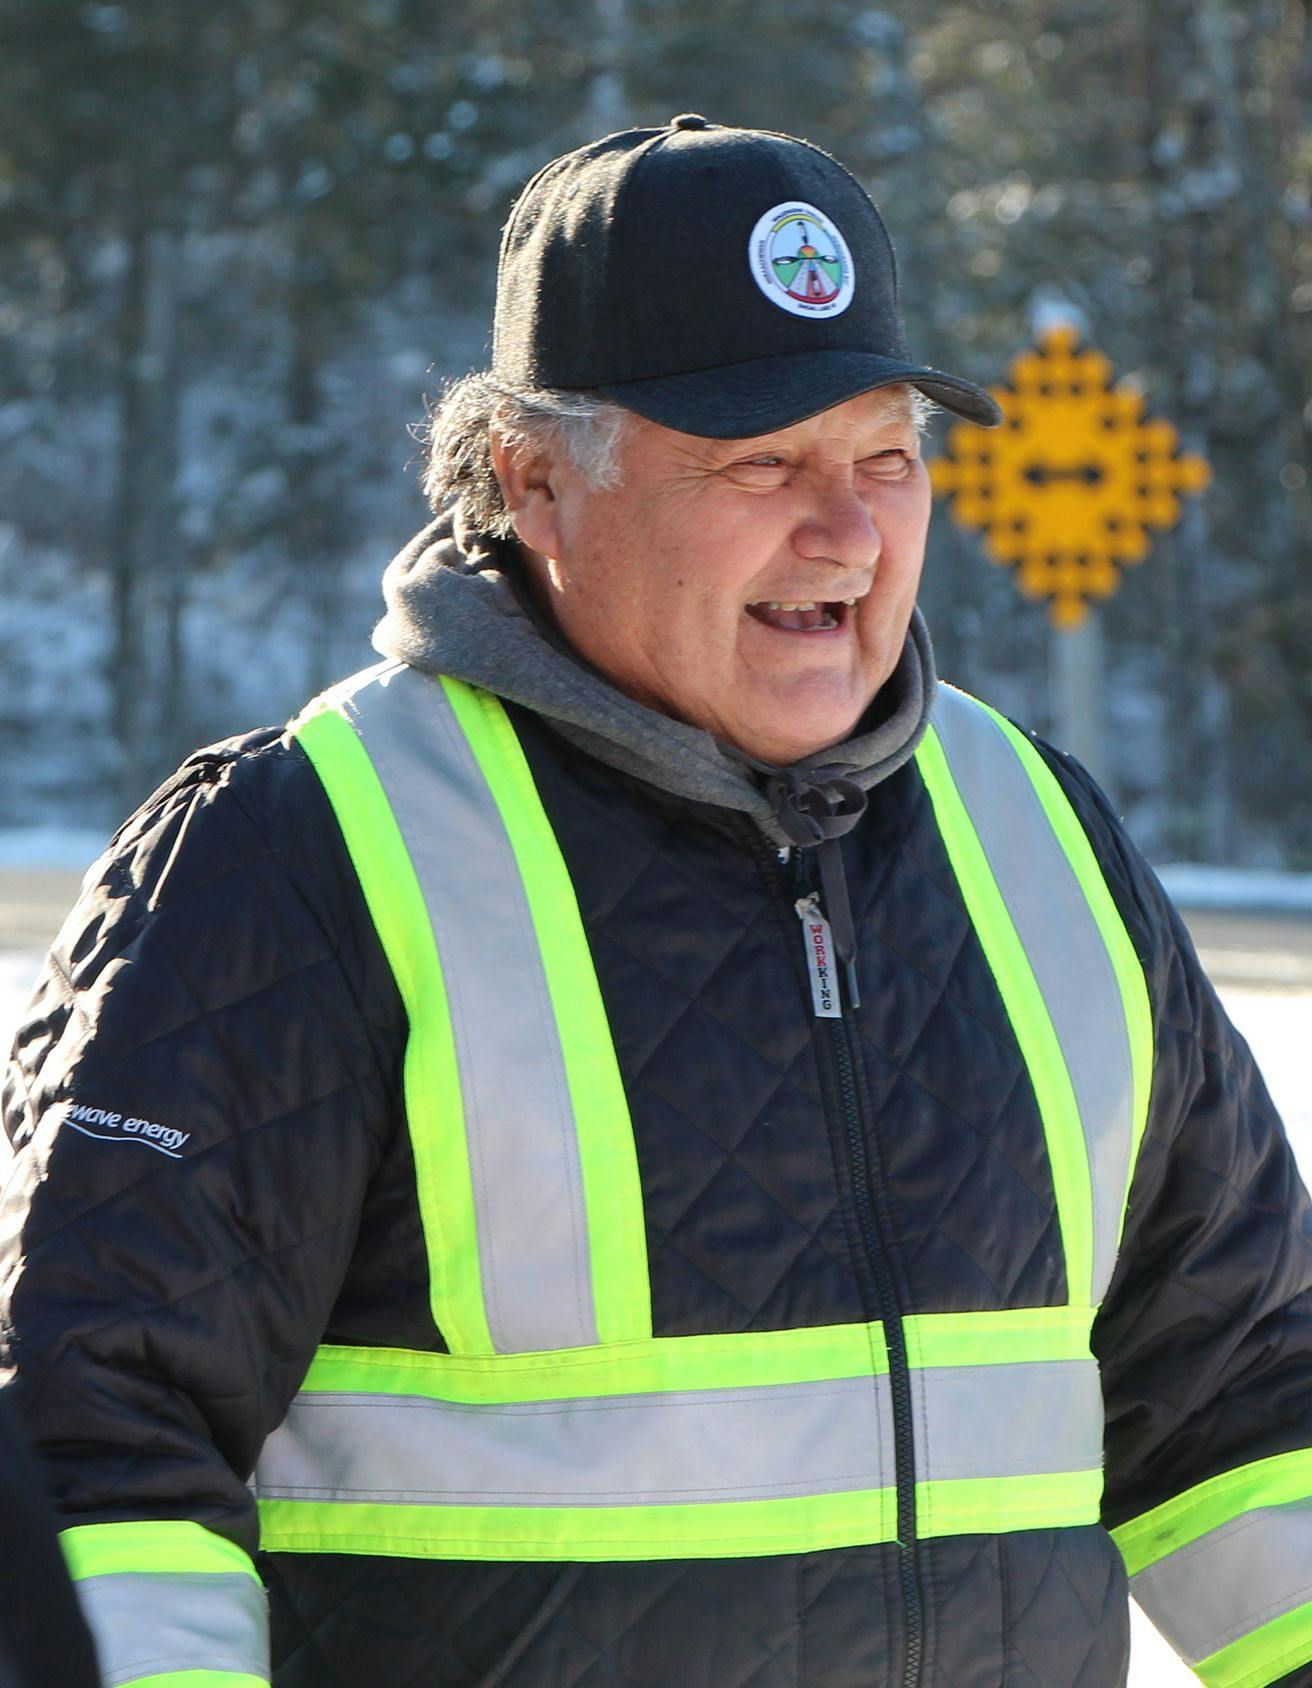 Elderly man smiling while wearing a safety jacket and ball cap